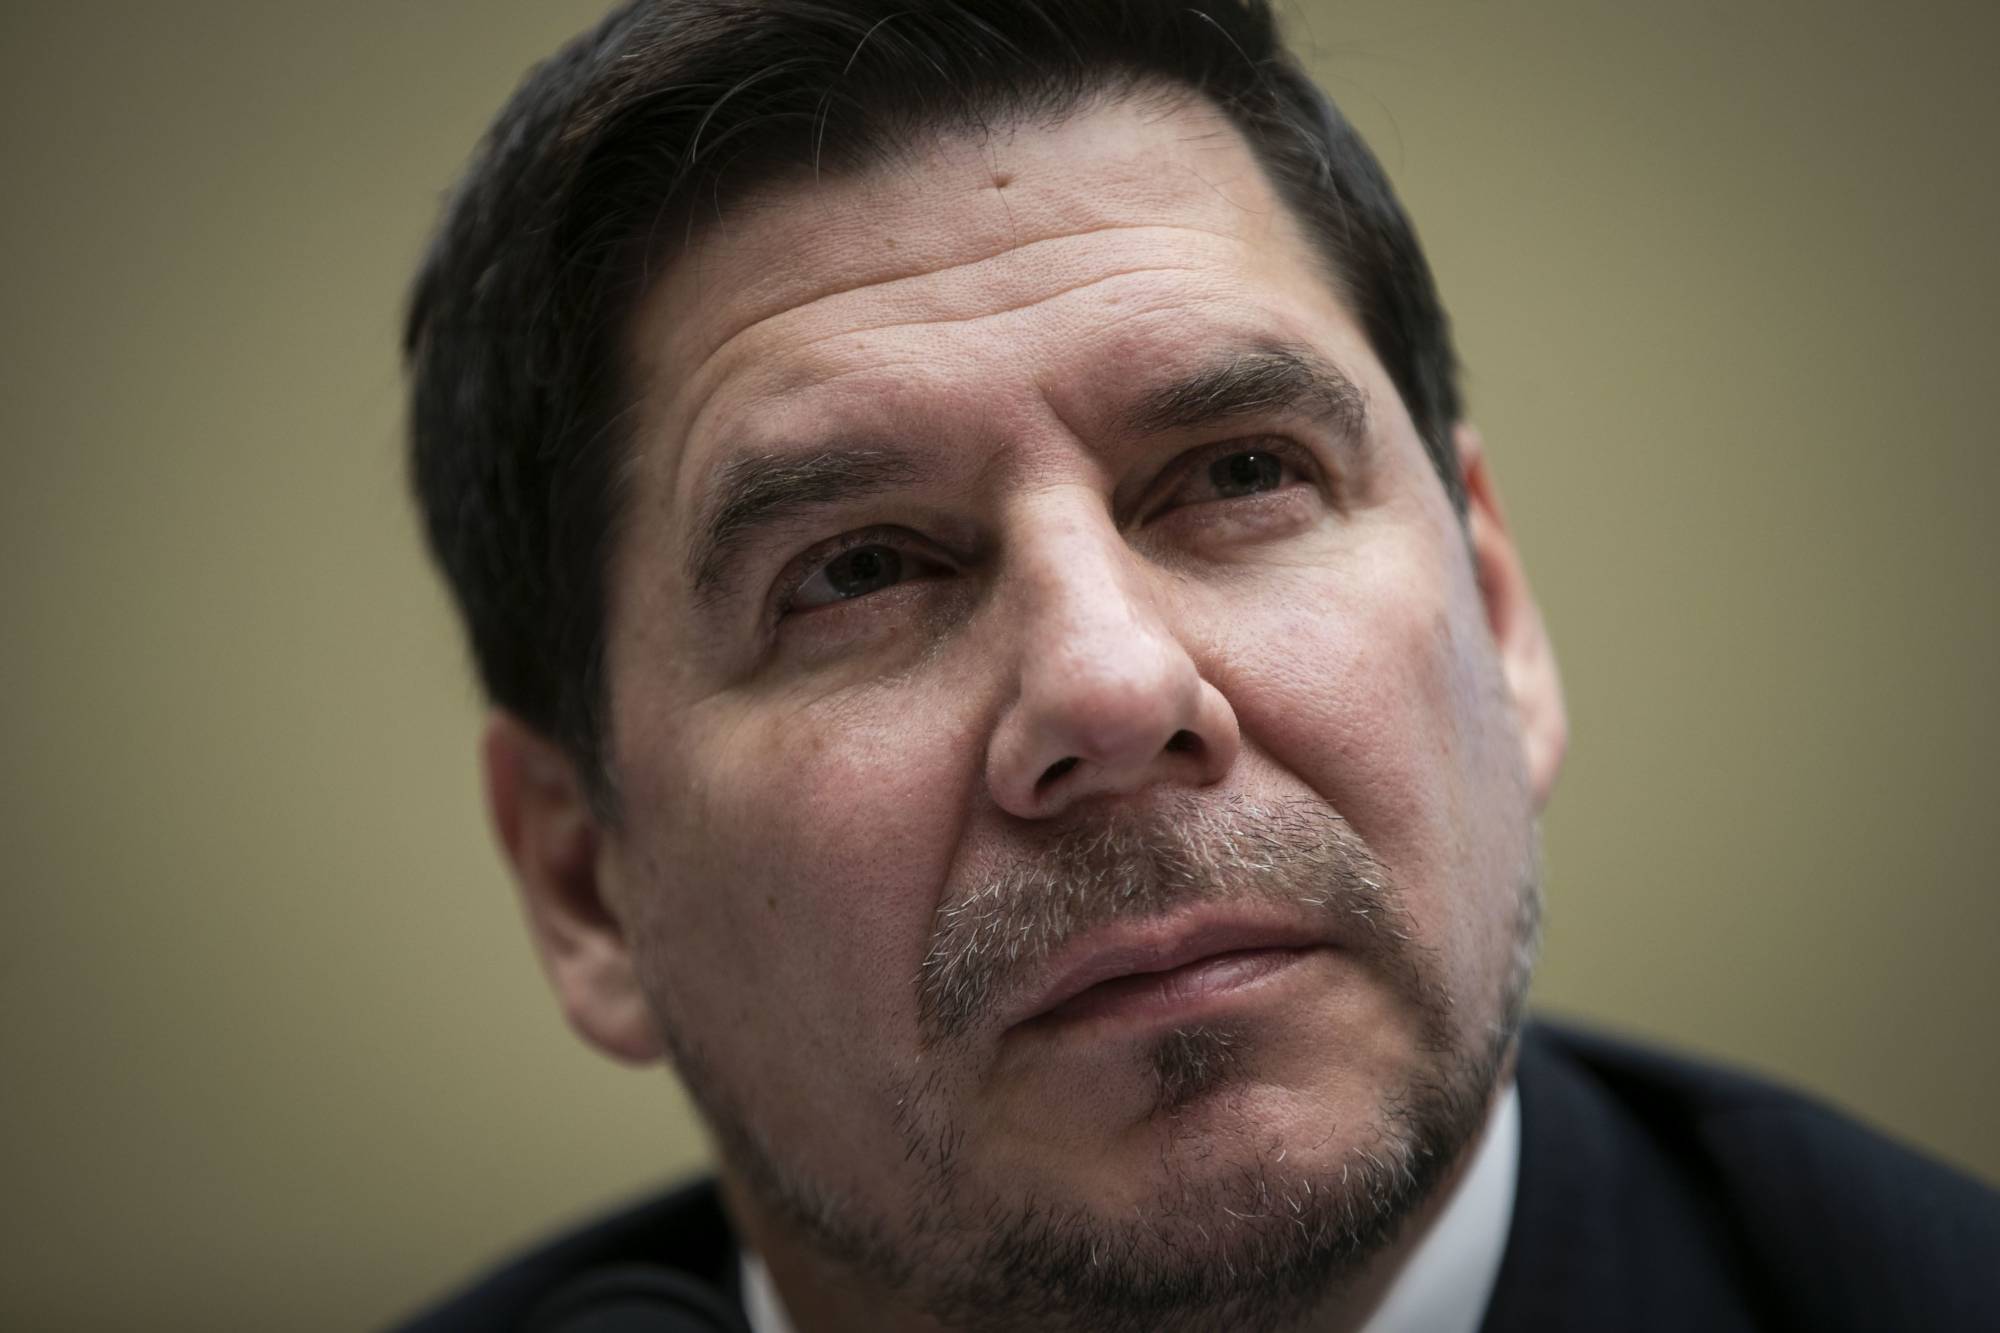 Marcelo Claure, who was SoftBank’s second-highest paid executive in the latest financial year, has often pushed for much more money and authority. | BLOOMBERG